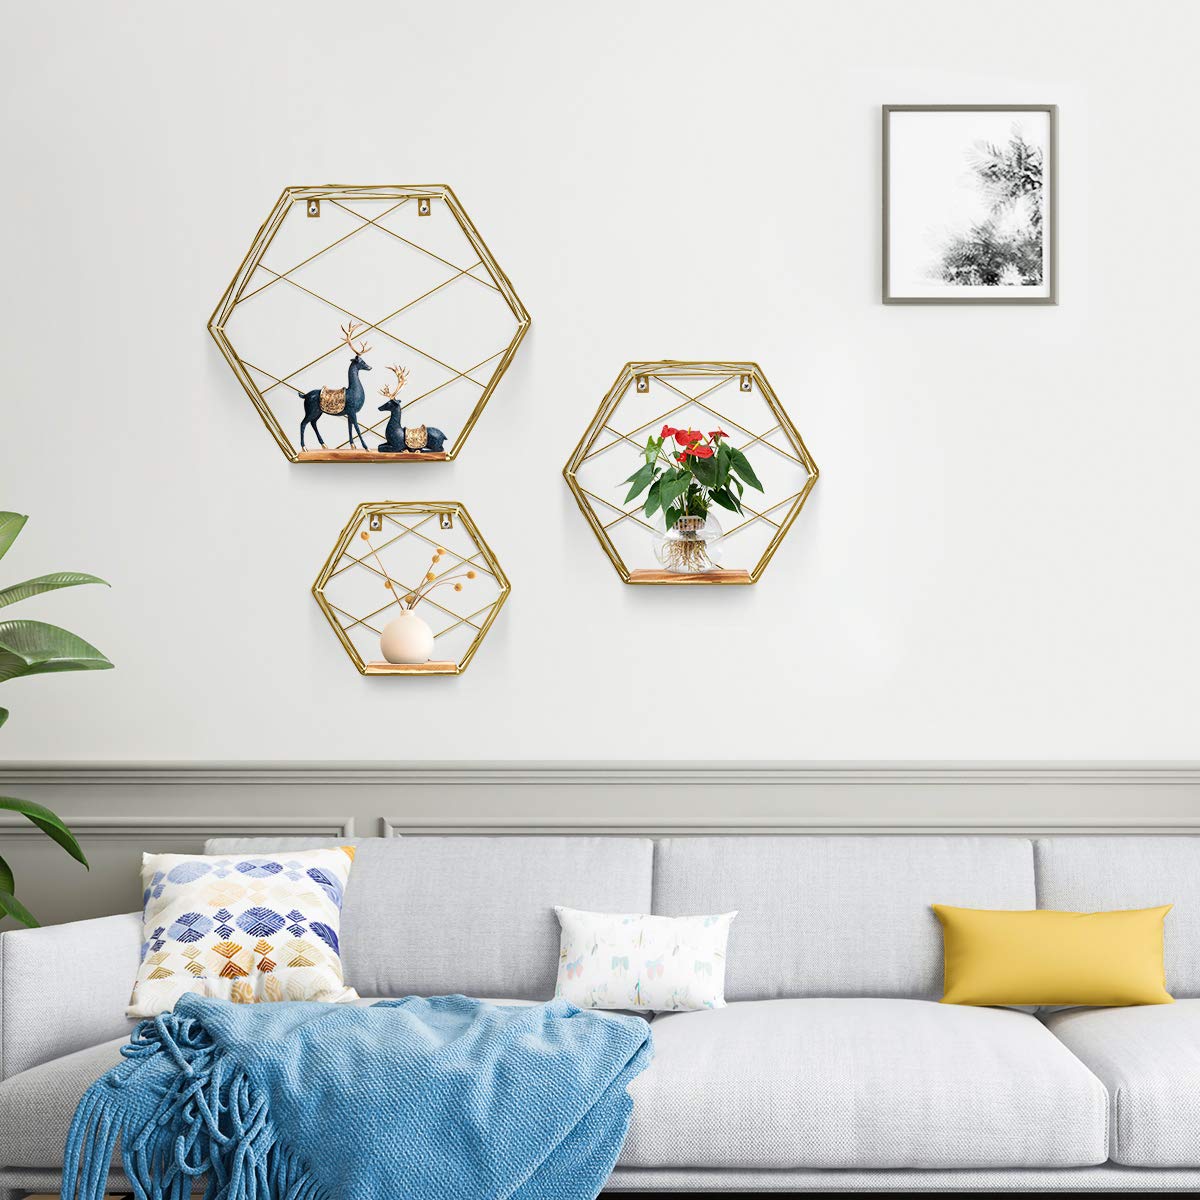 3Pcsset-Hexagonal-Wall-Mounted-Shelves-Floating-Wall-Storage-Rack-Holder-Organizer-Display-Stand-Hom-1792546-7